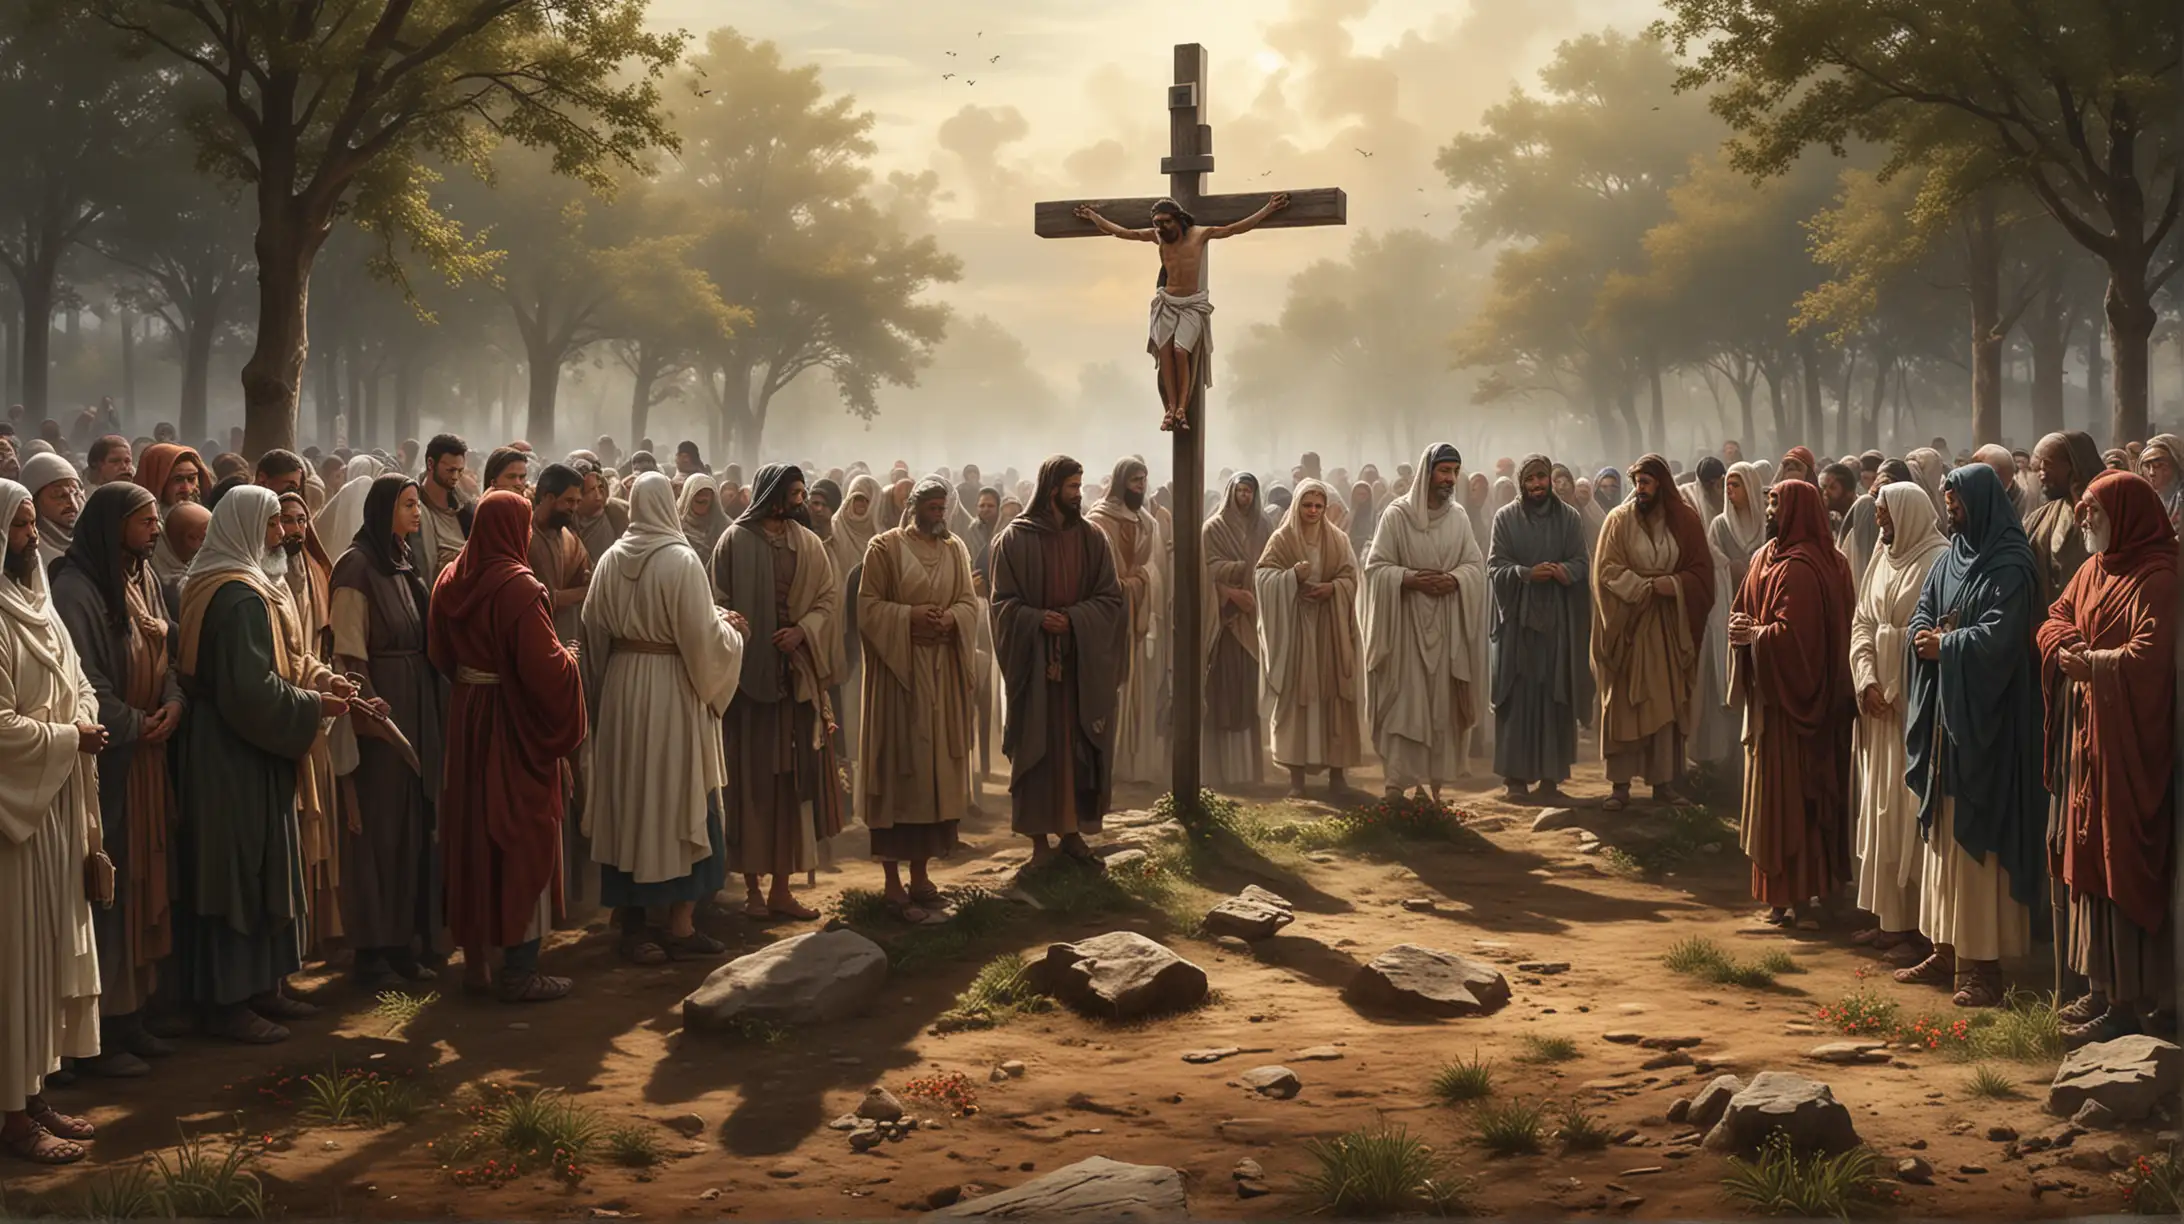 An evocative digital artwork depicting individuals from diverse backgrounds and walks of life gathering at the foot of the cross, symbolizing the universality of Christ's love and the leveling of societal distinctions in the presence of his sacrifice, inspired by the saying "The ground is level at the foot of the cross."